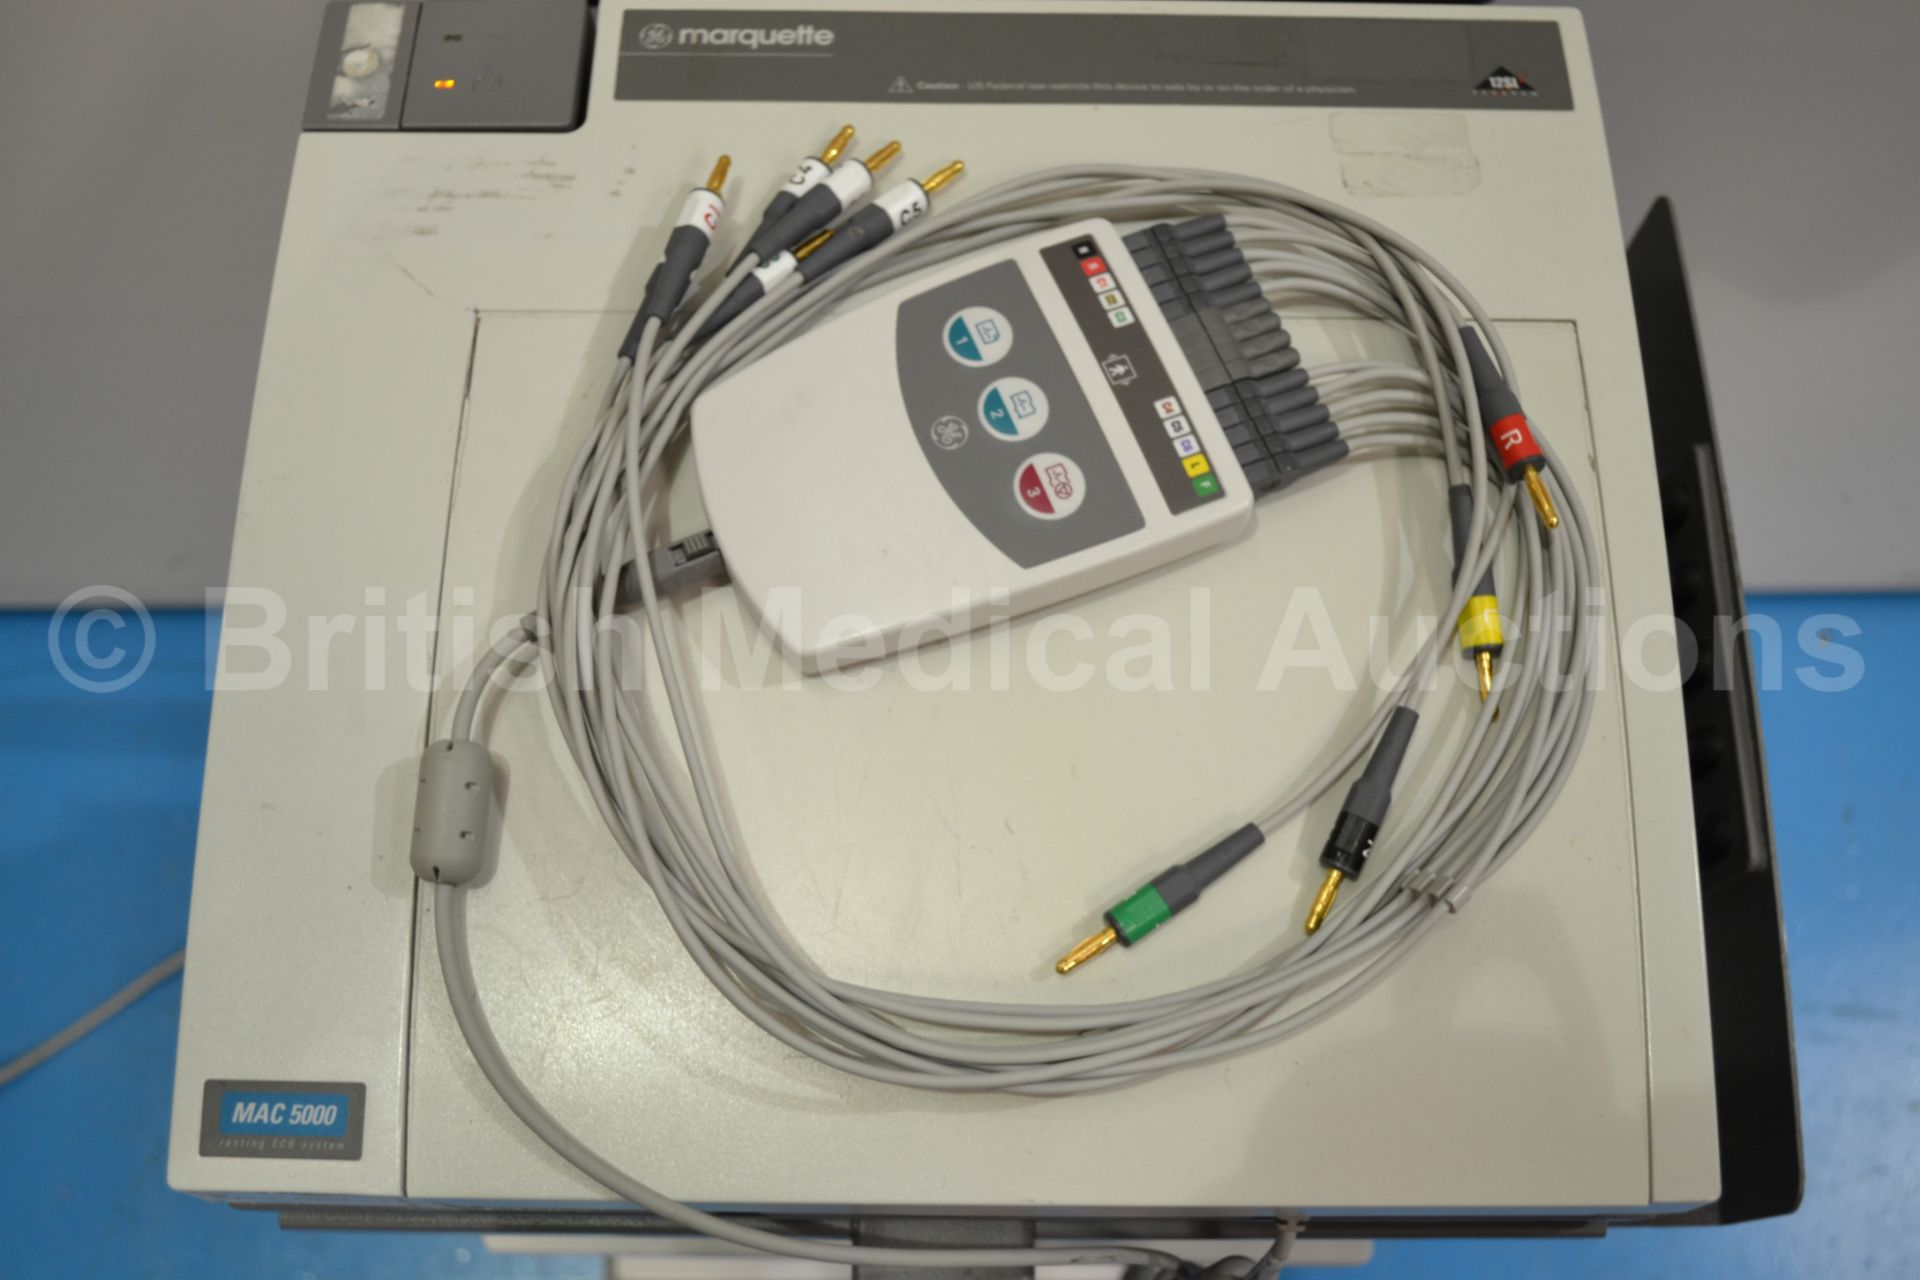 GE Marquette MAC 5000 Resting ECG System with ECG - Image 3 of 3